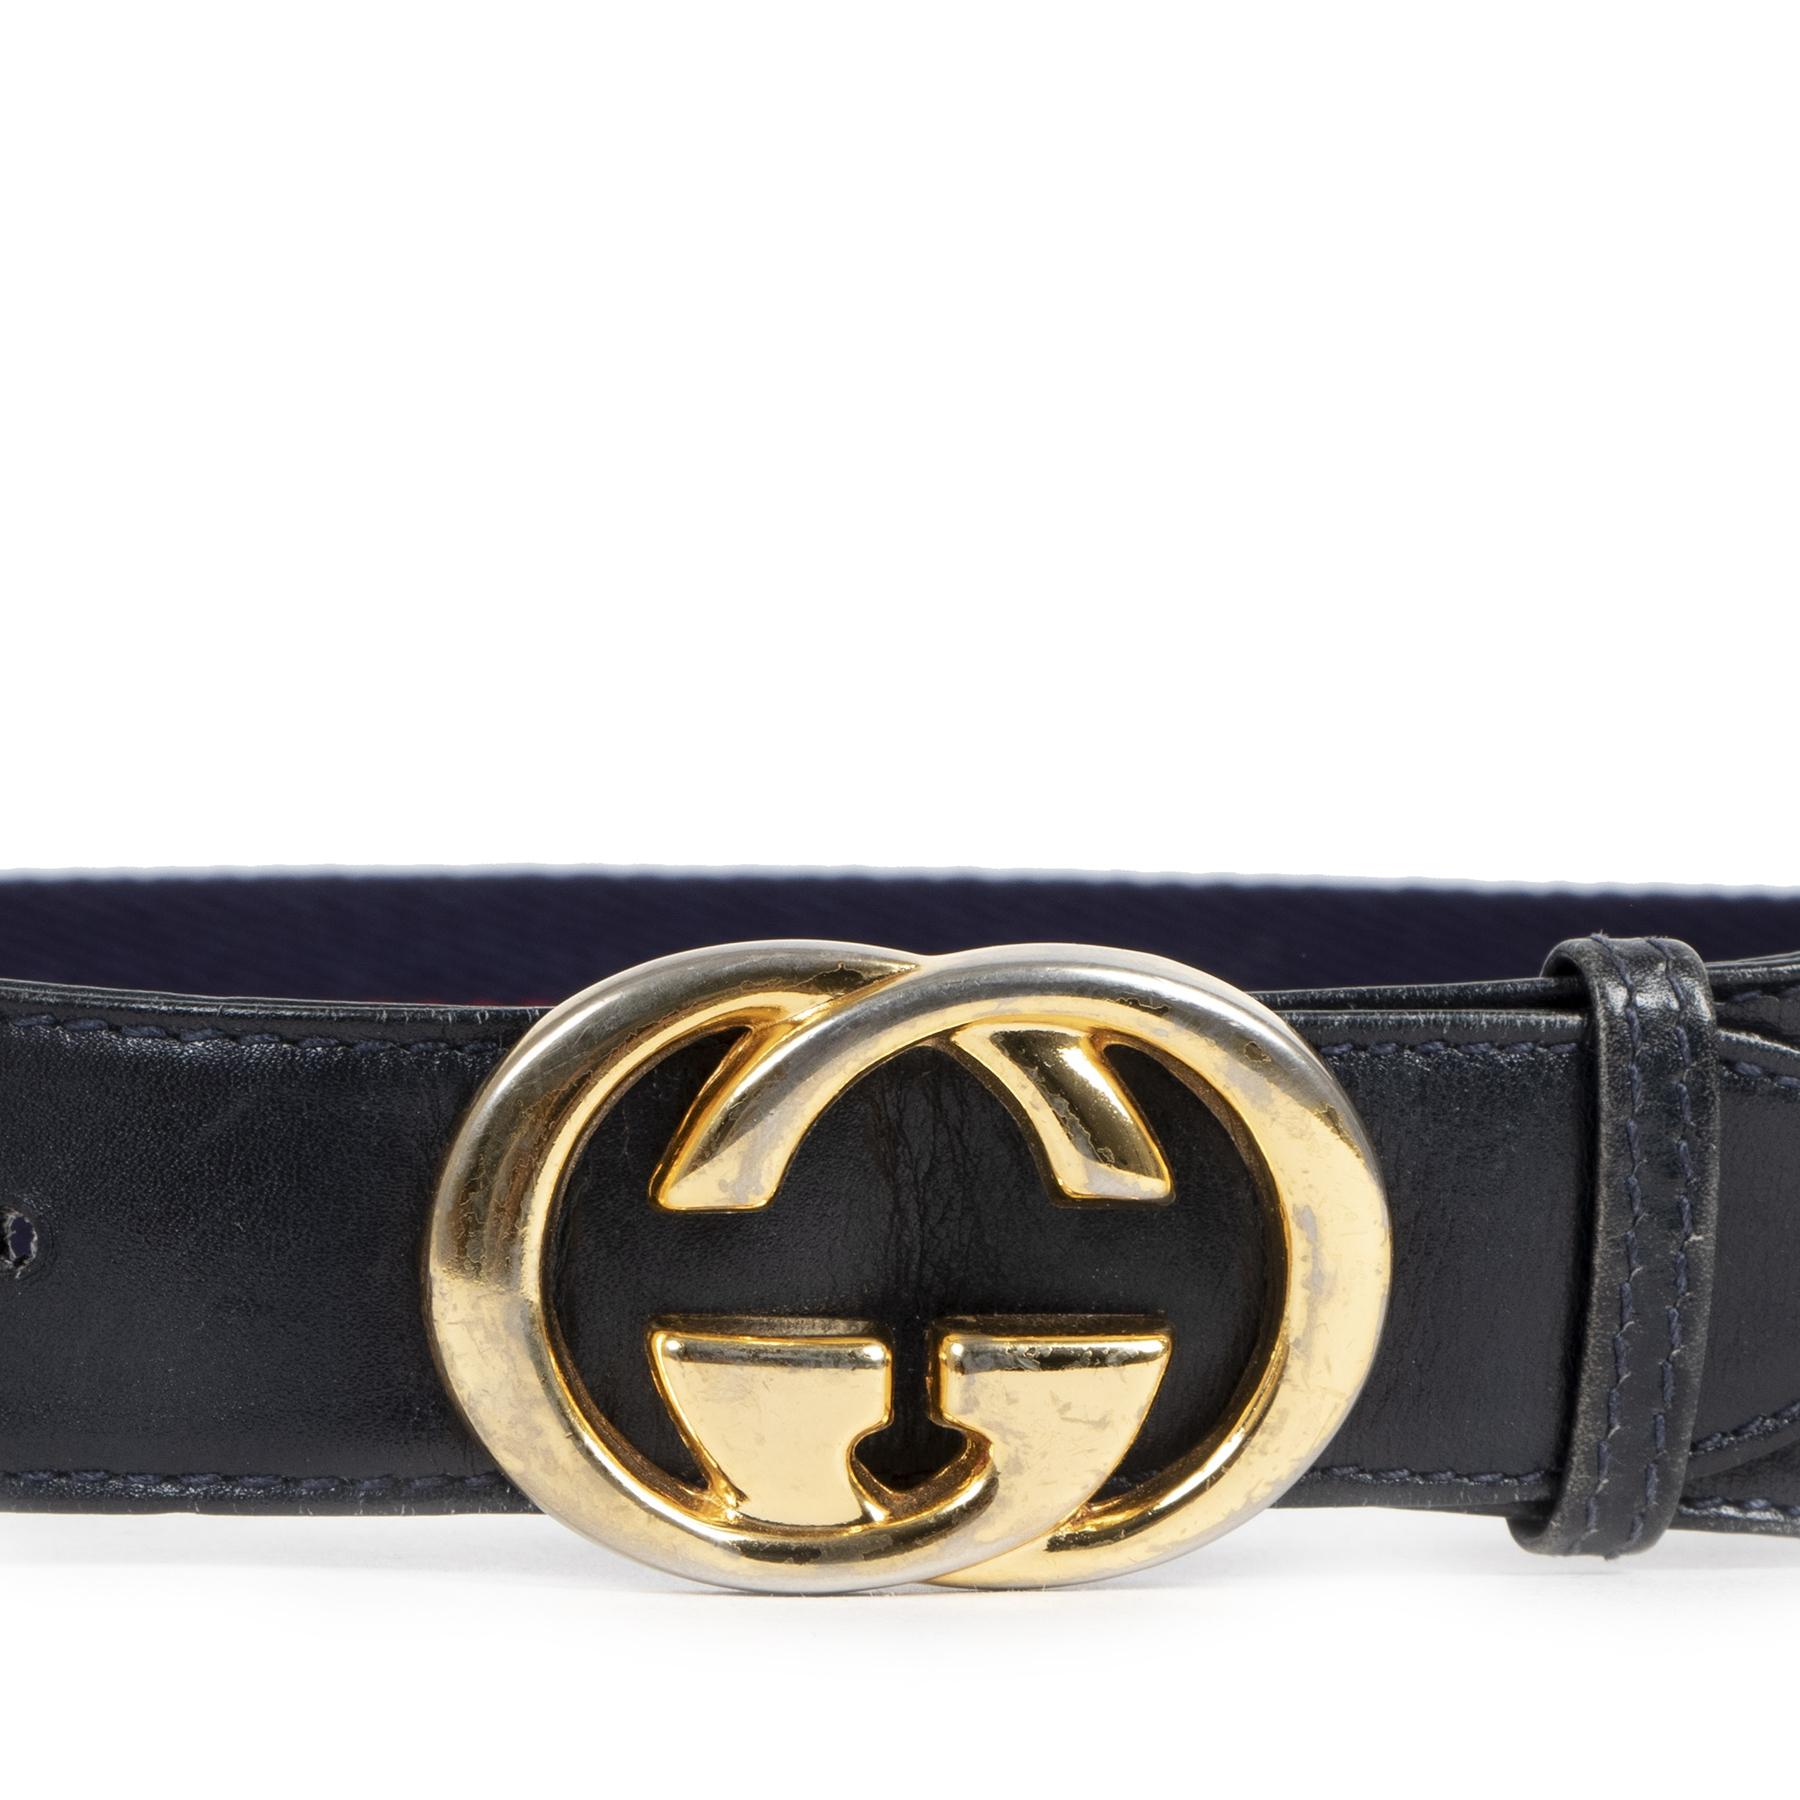 Good preloved condition

Gucci Blue Red Web Belt GG Buckle

This iconic Gucci belt is crafted in red and blue web and features the gold-toned interlocking G belt buckle. Style this belt with blue jeans and a white tee for a casual look. It's the